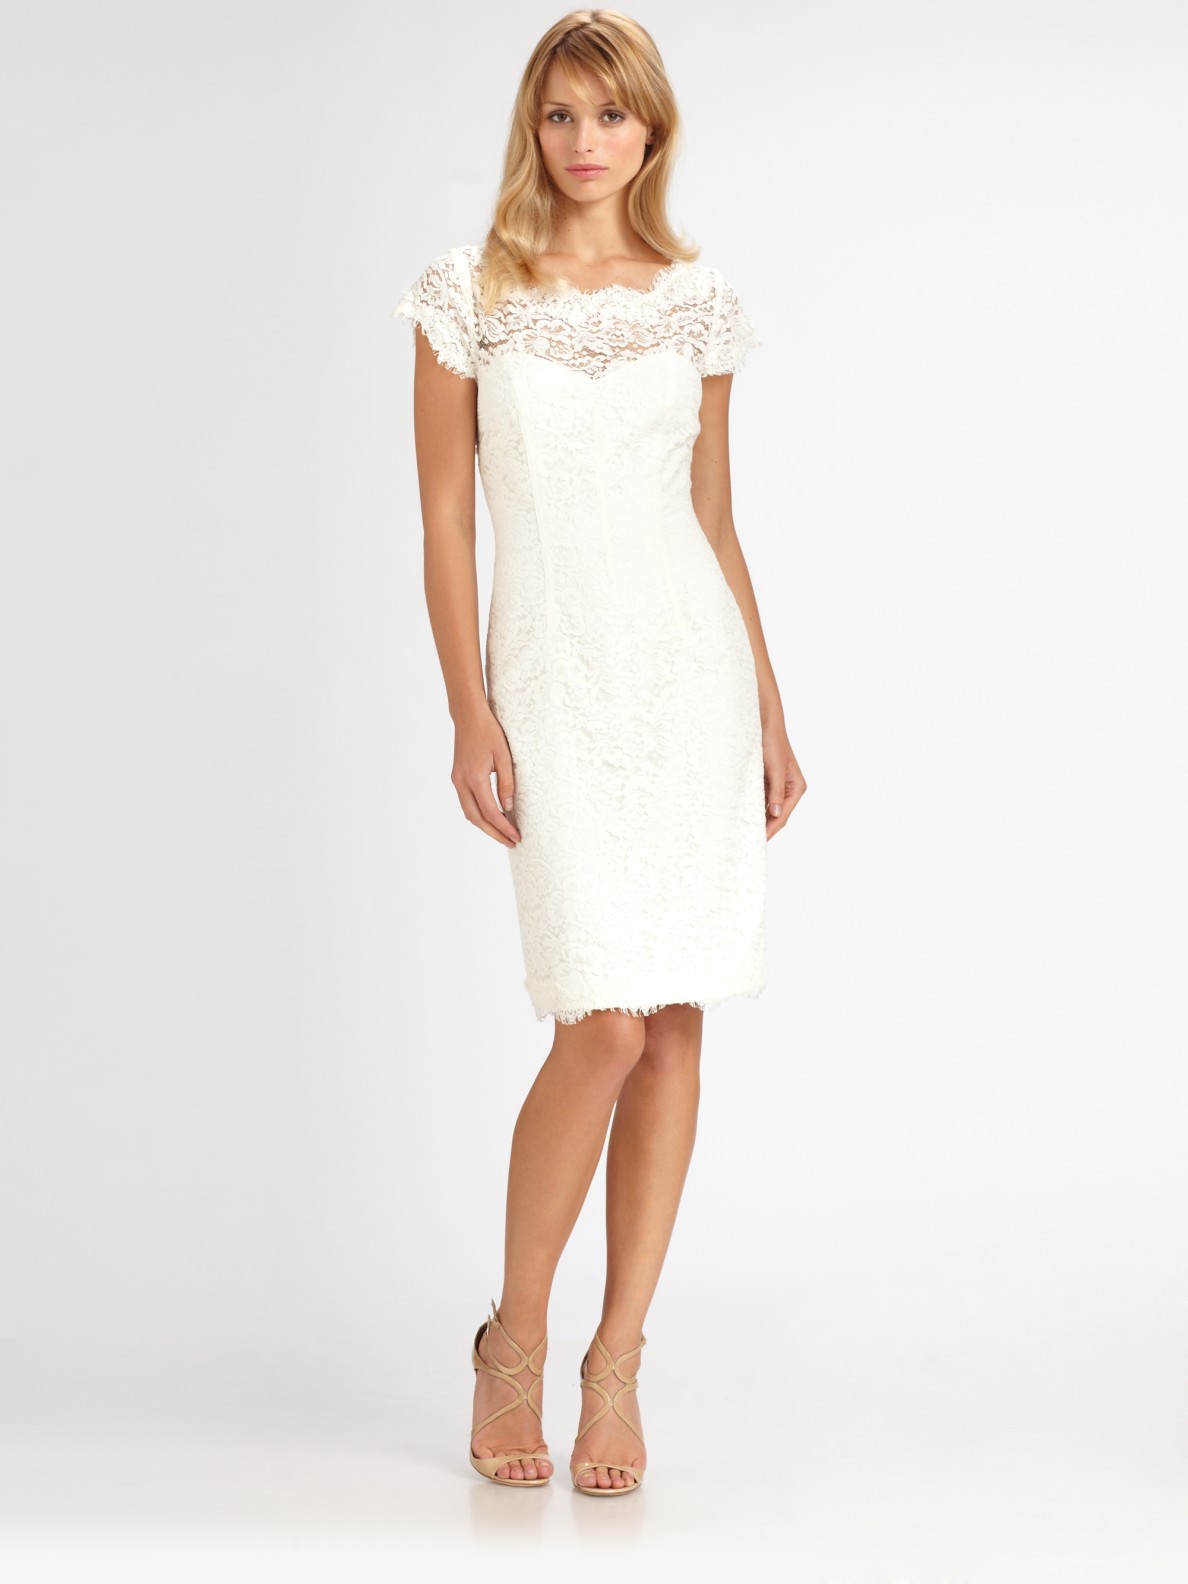 White Lace Dress Picture Collection | Dressed Up Girl